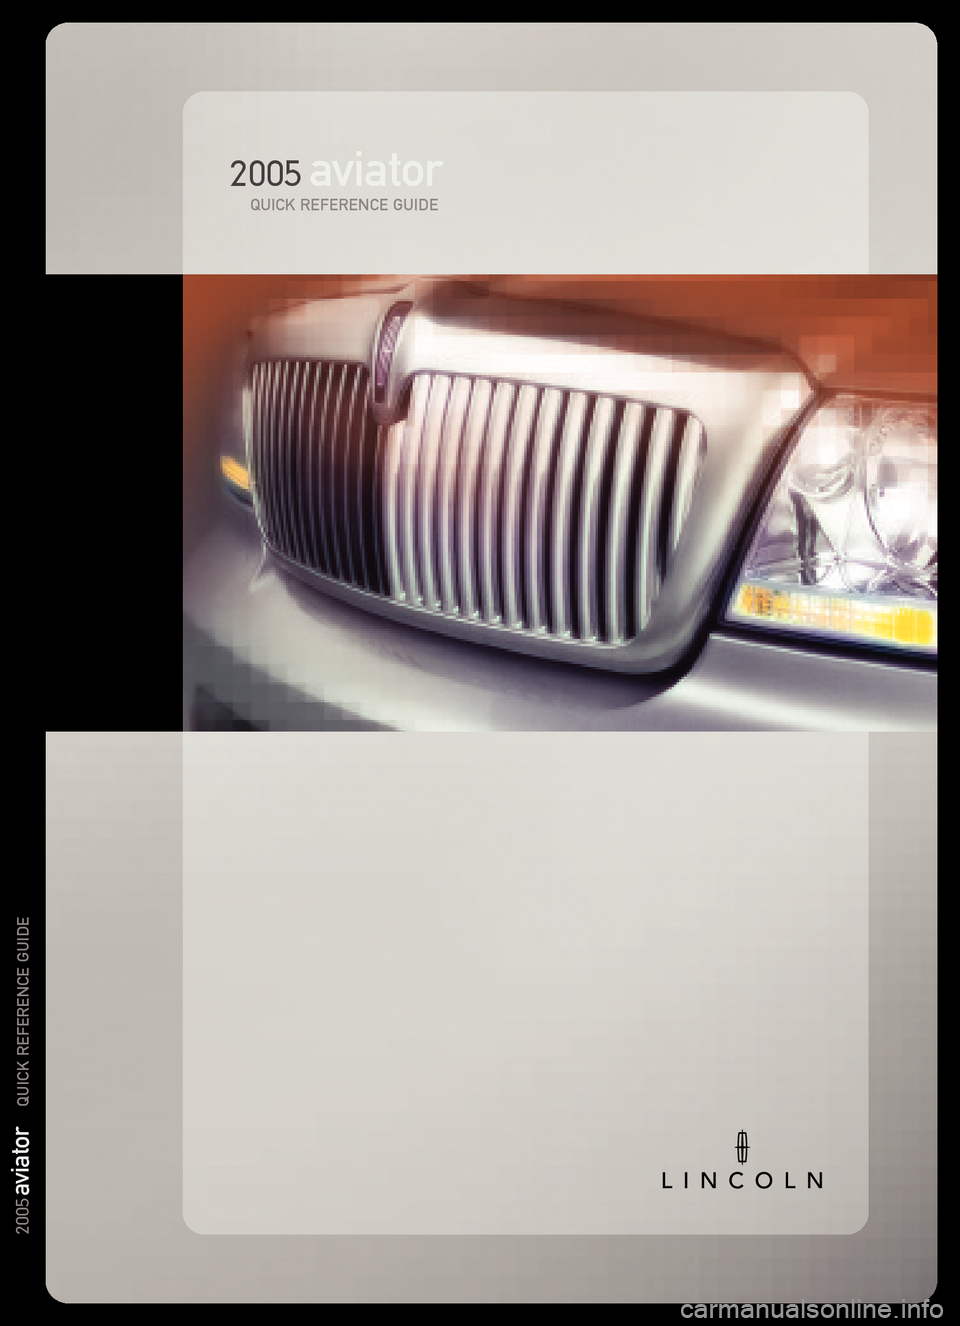 LINCOLN AVIATOR 2005  Quick Reference Guide 2005aviatorQUICK REFERENCE GUIDE
2005
aviator   
QUICK REFERENCE GUIDE 